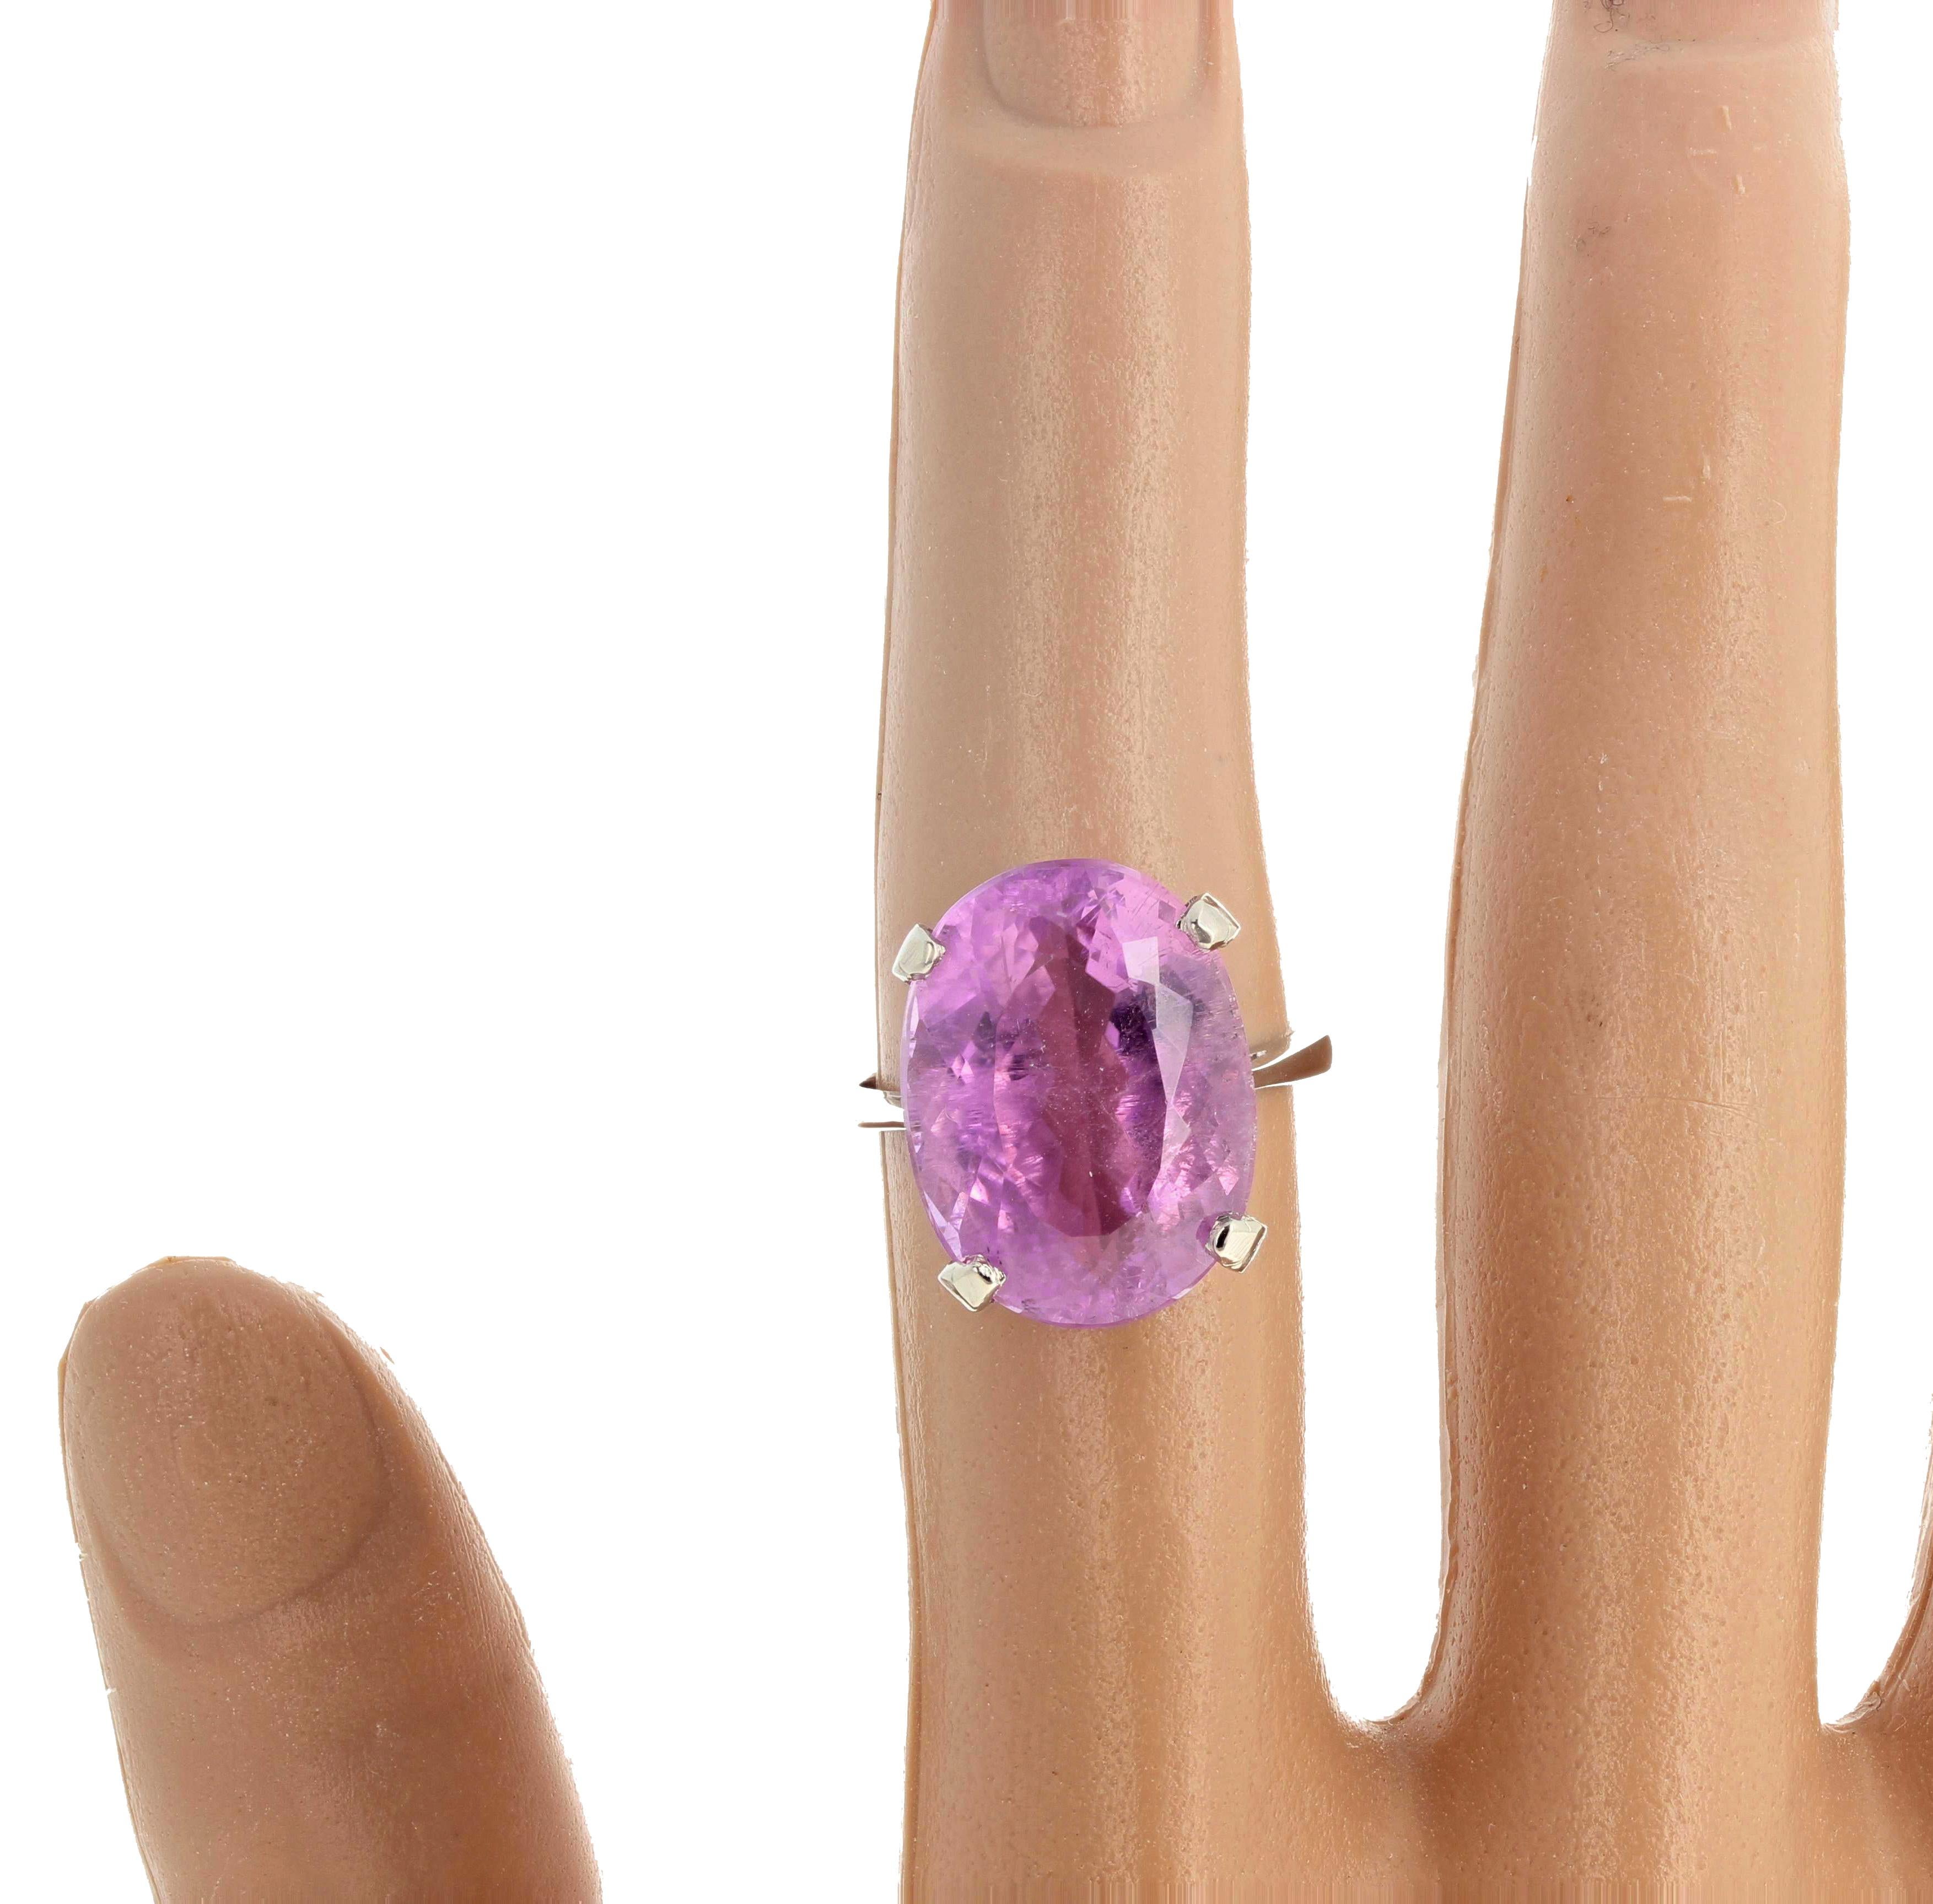 Deep Intense Pink sparkling natural 14.16Kt  Brasilian Kunzite  (17.1mm x 12.8 mm) set in a lovely sterling silver ring size 7 sizable.  The quality of this lovely Kunzite can be seen by looking at the photograph of the gemstone through the back of